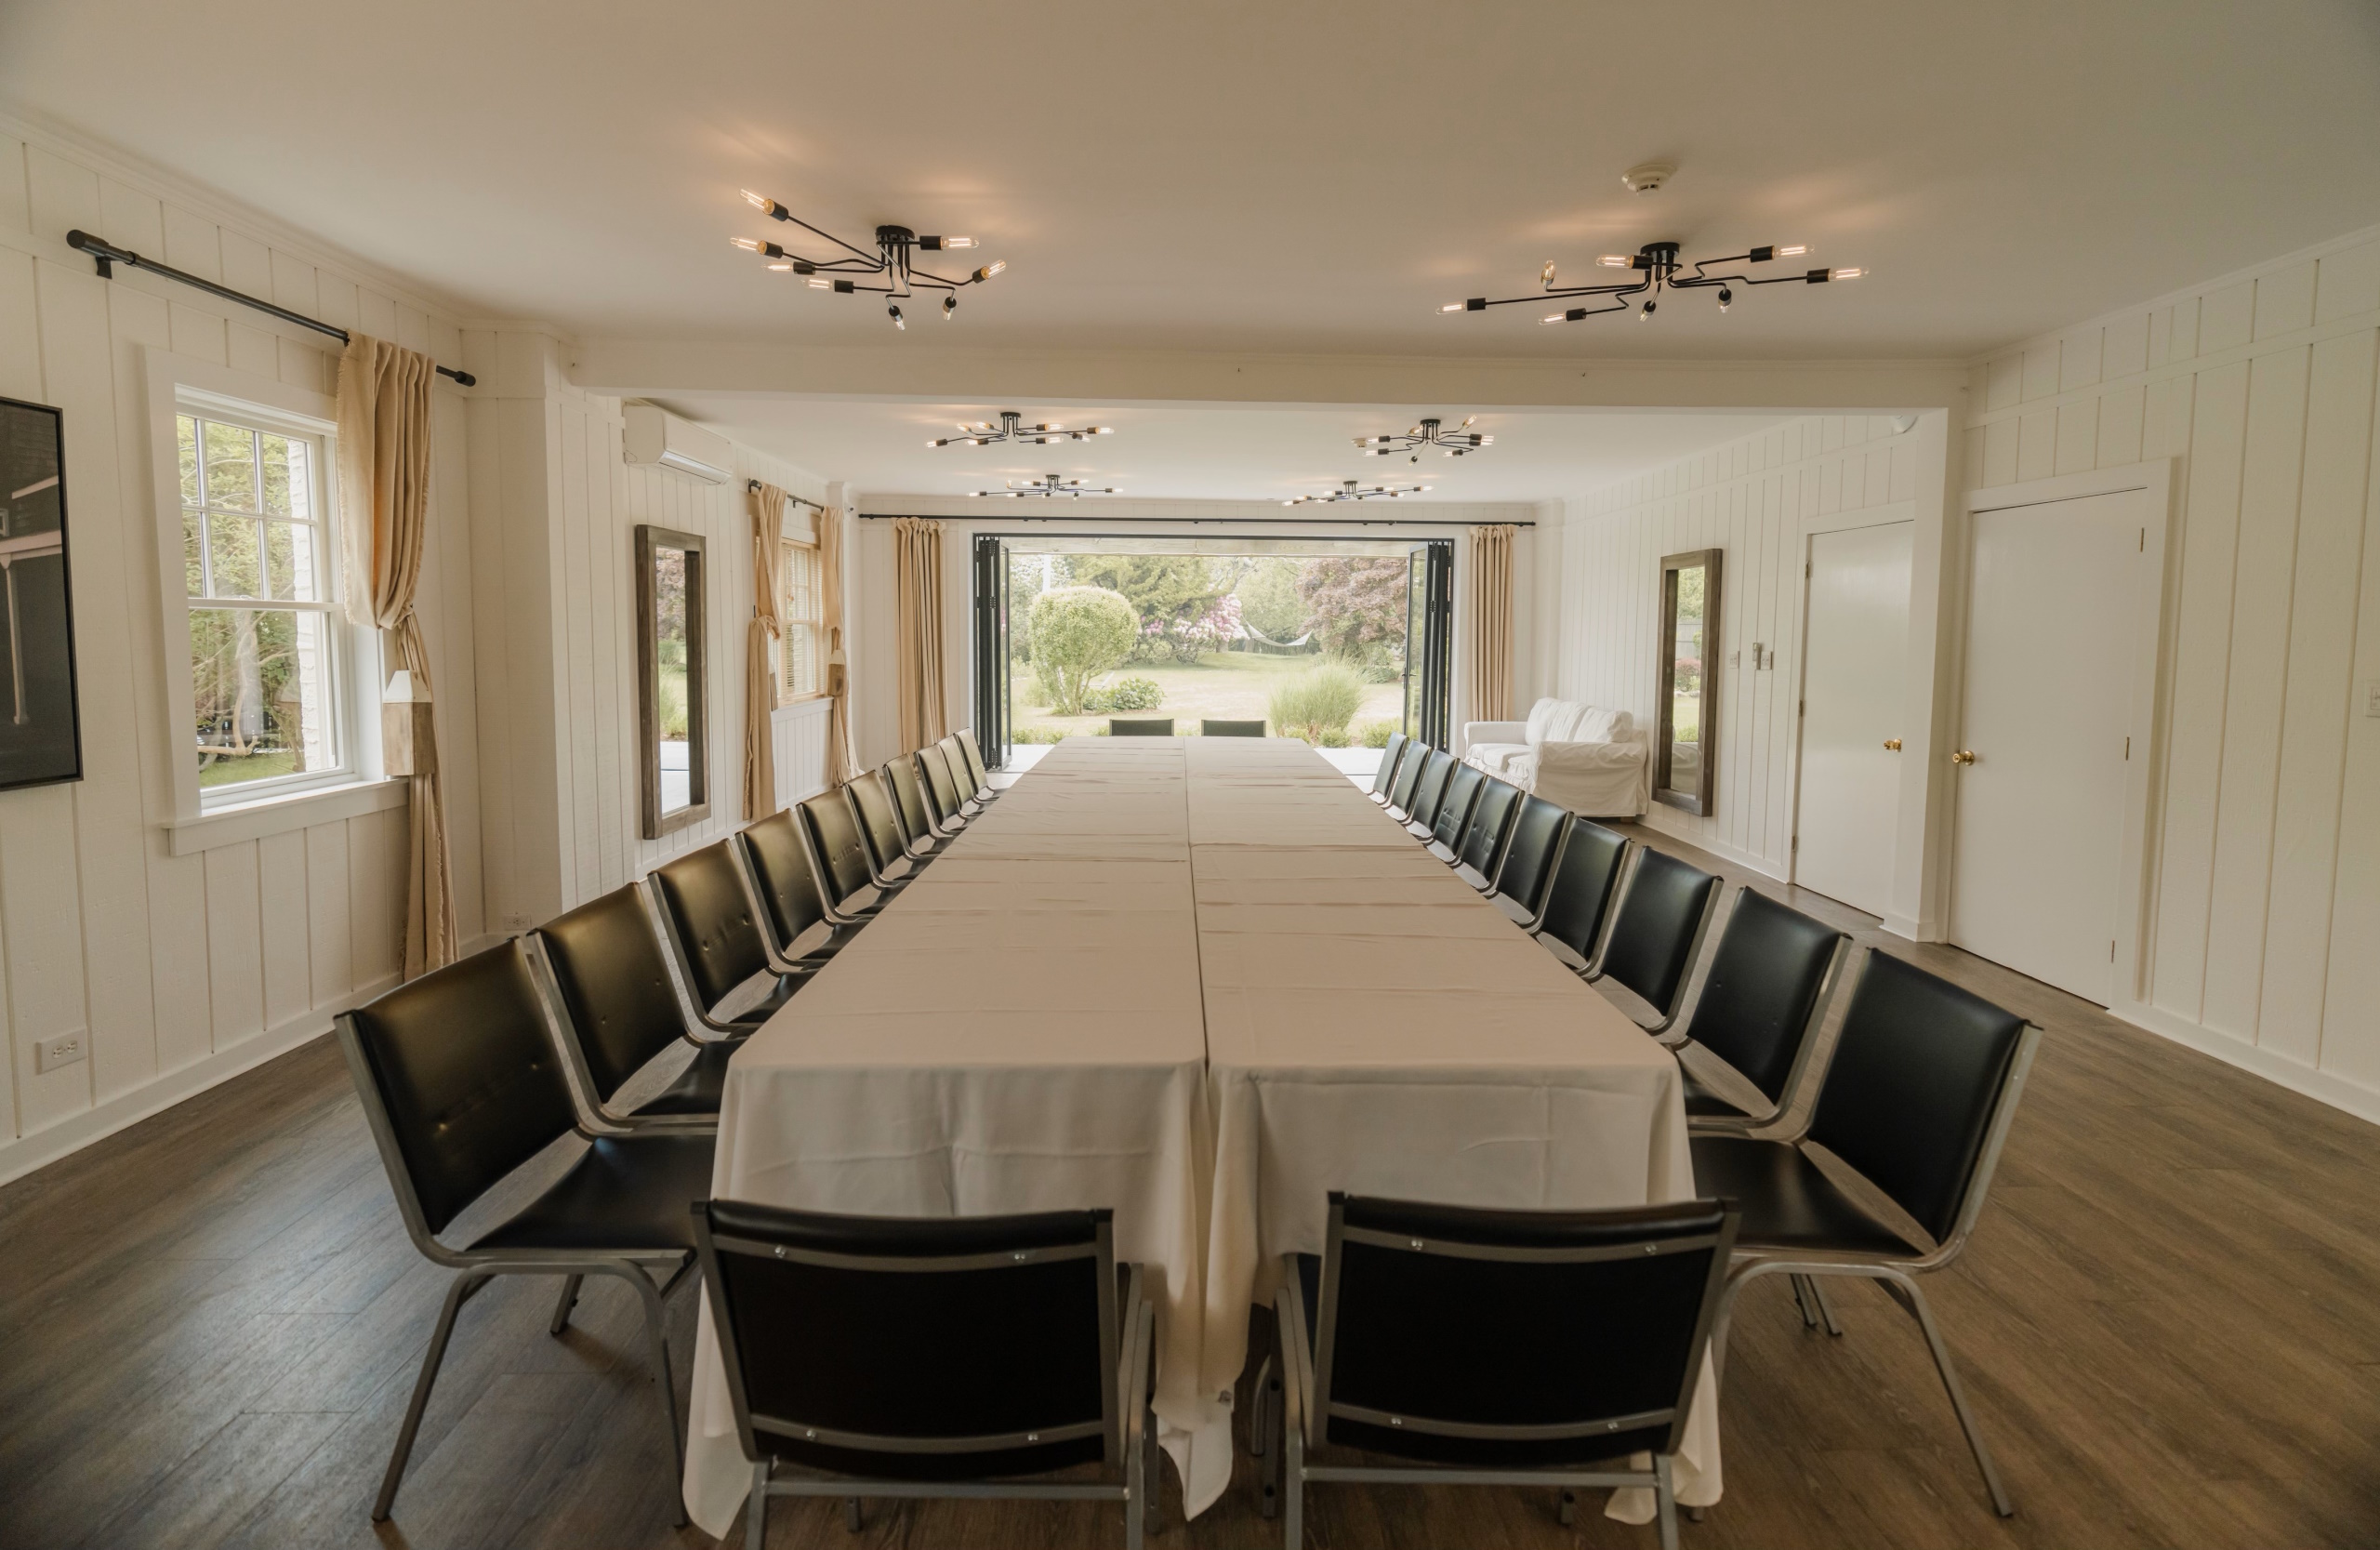 The Windward Conference Room